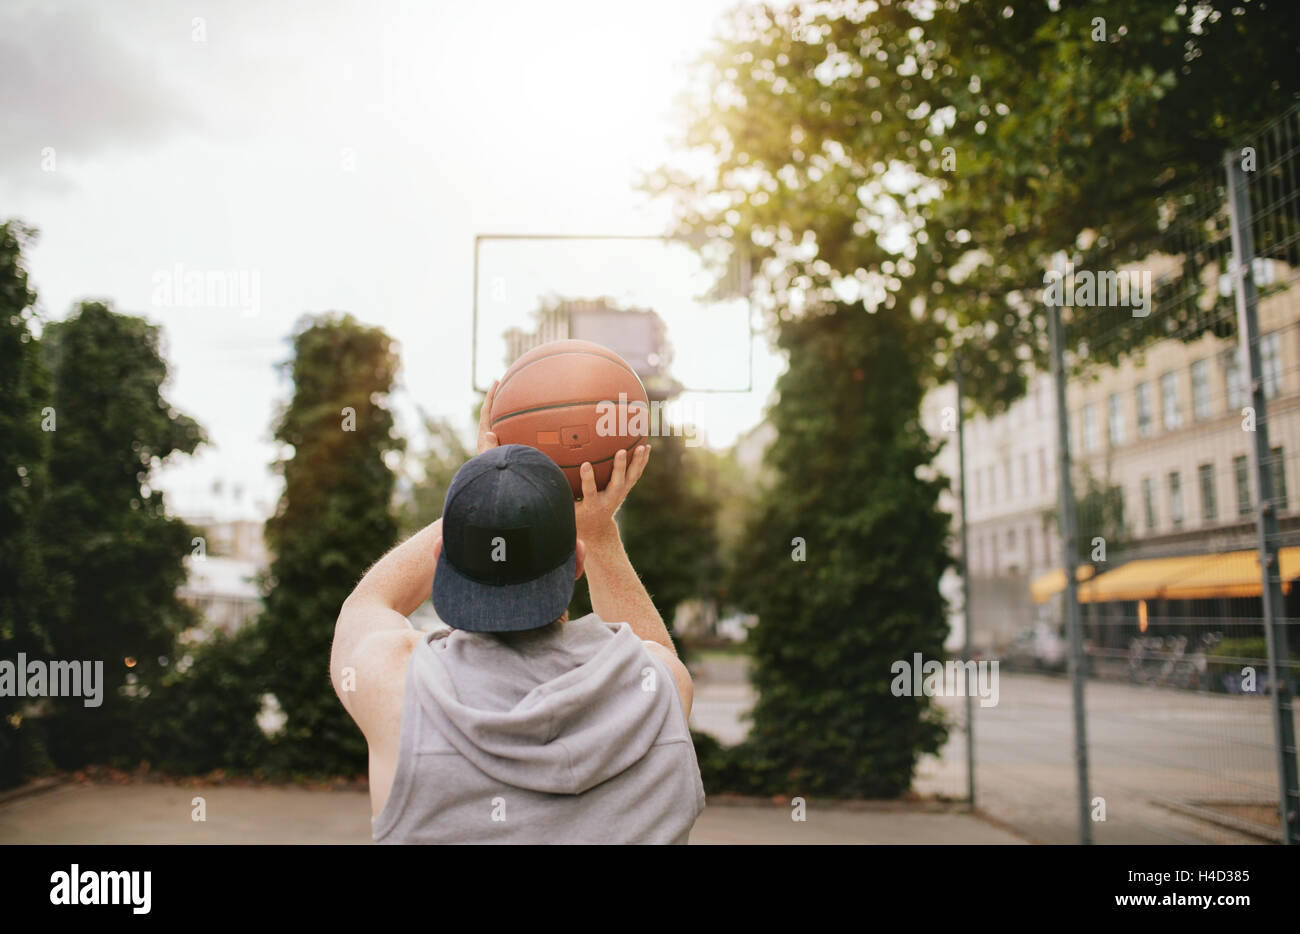 Rear view shot of a young guy playing basketball on outdoor court. Streetball player shoots basket. Stock Photo